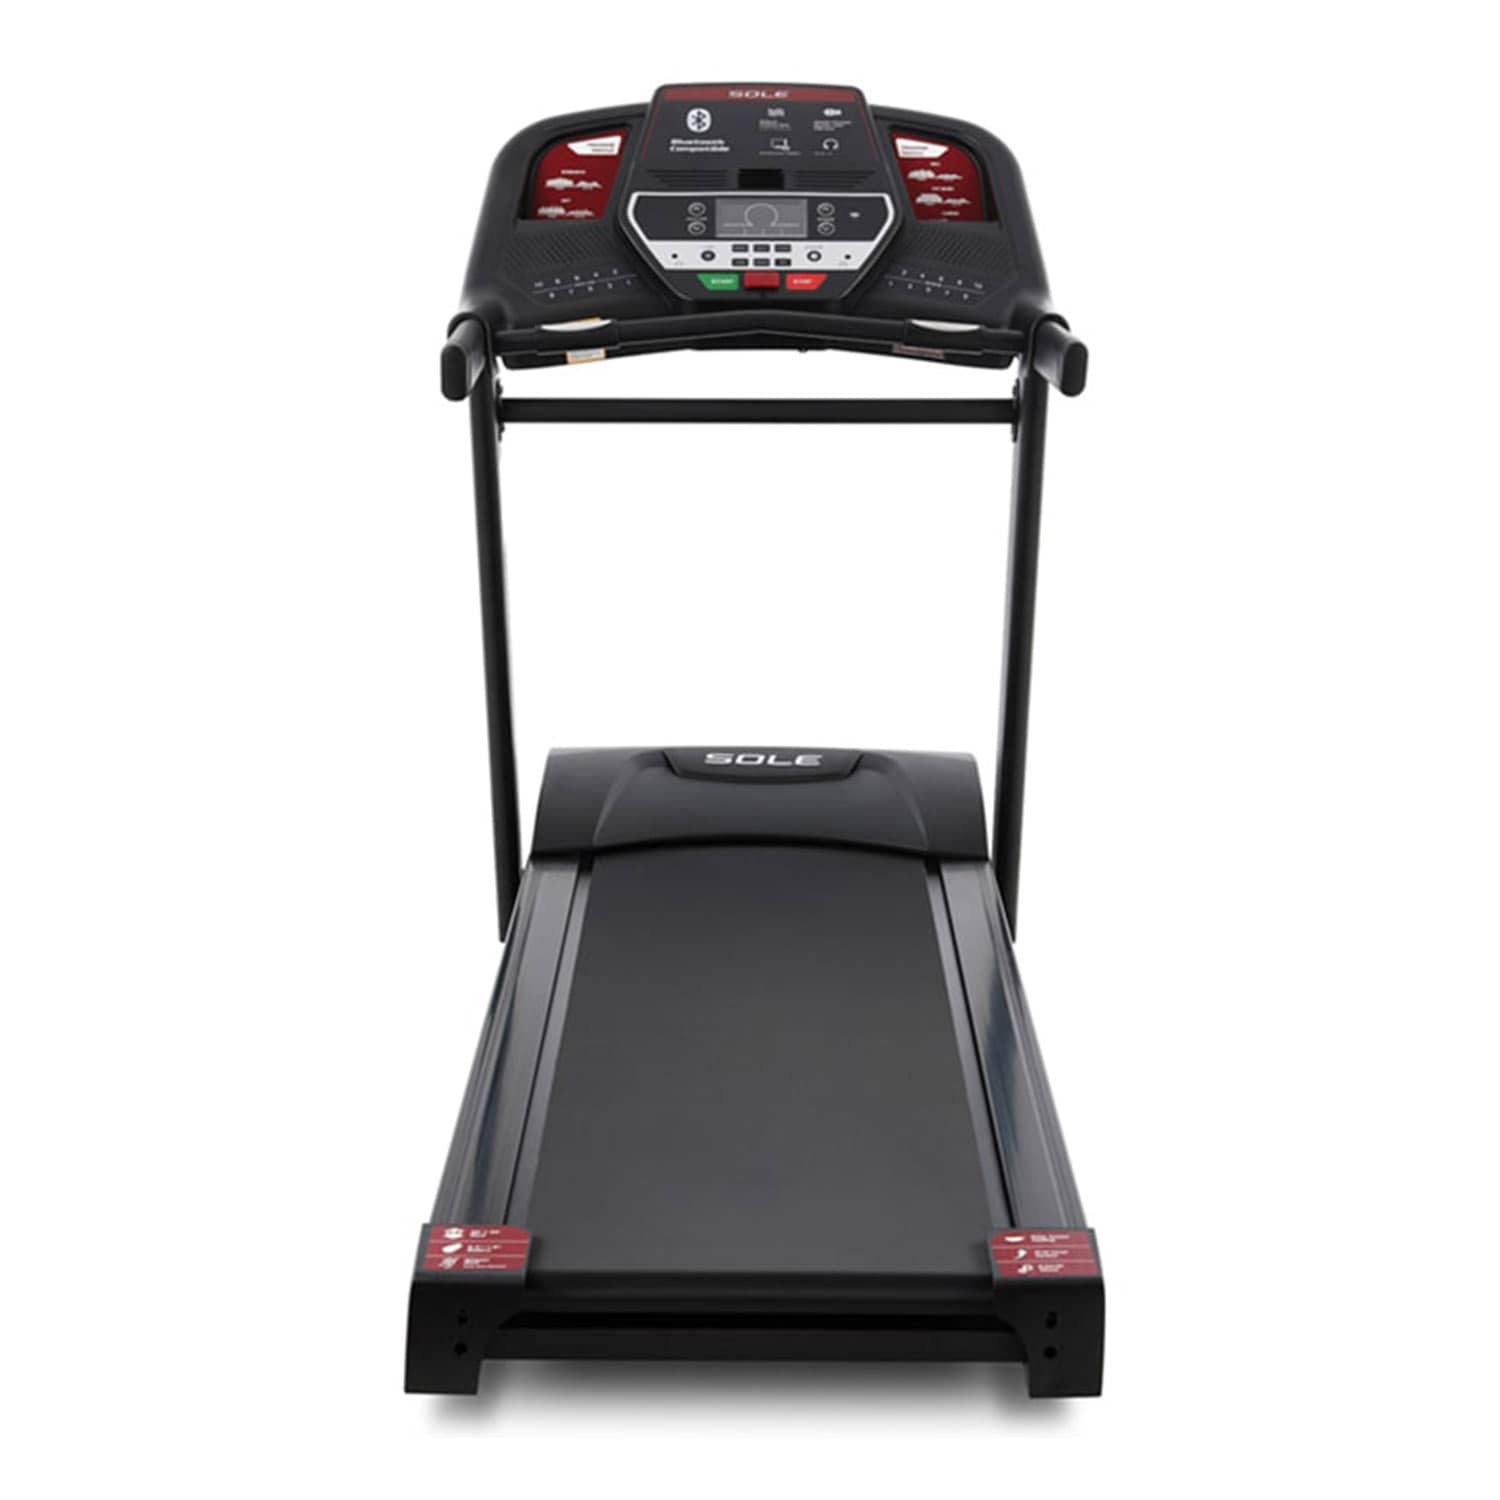 ARGT Sole Fitness F60 Home Use Treadmill